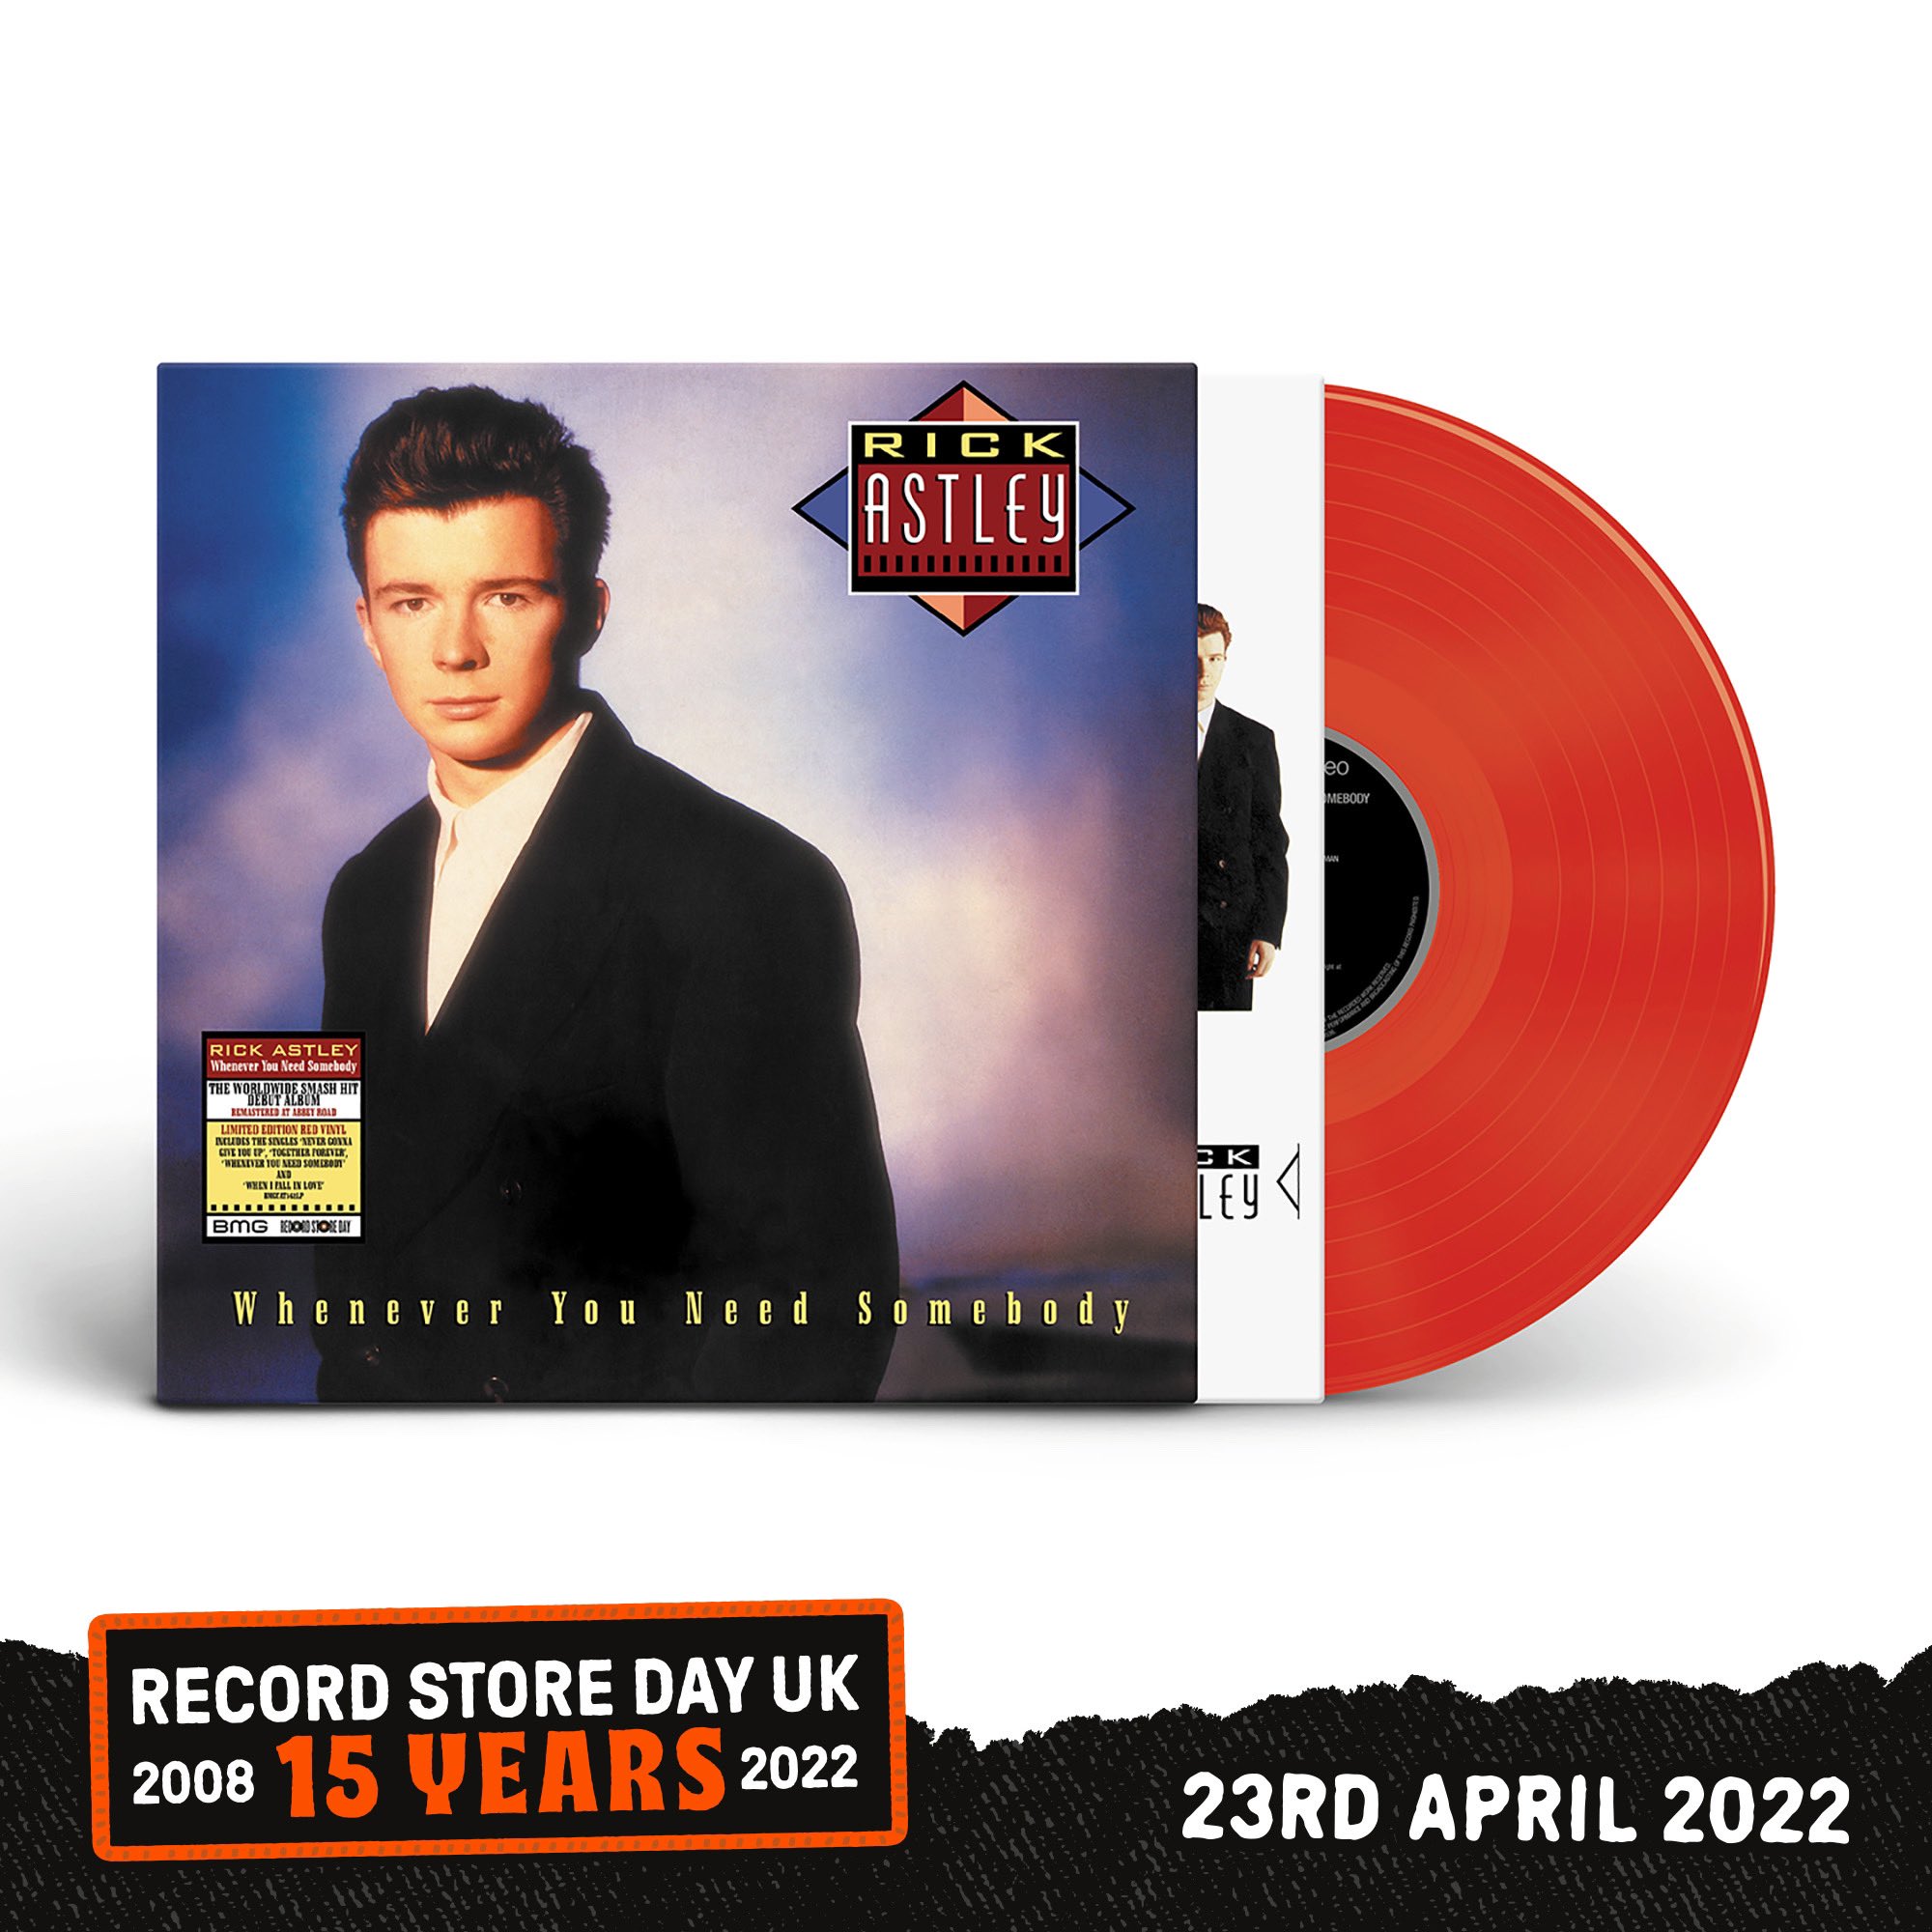 Rick Astley on X: On May 20th the remastered edition of Rick's debut album  'Whenever You Need Somebody' will be released. We've got a surprise lined  up too, but that's all we're